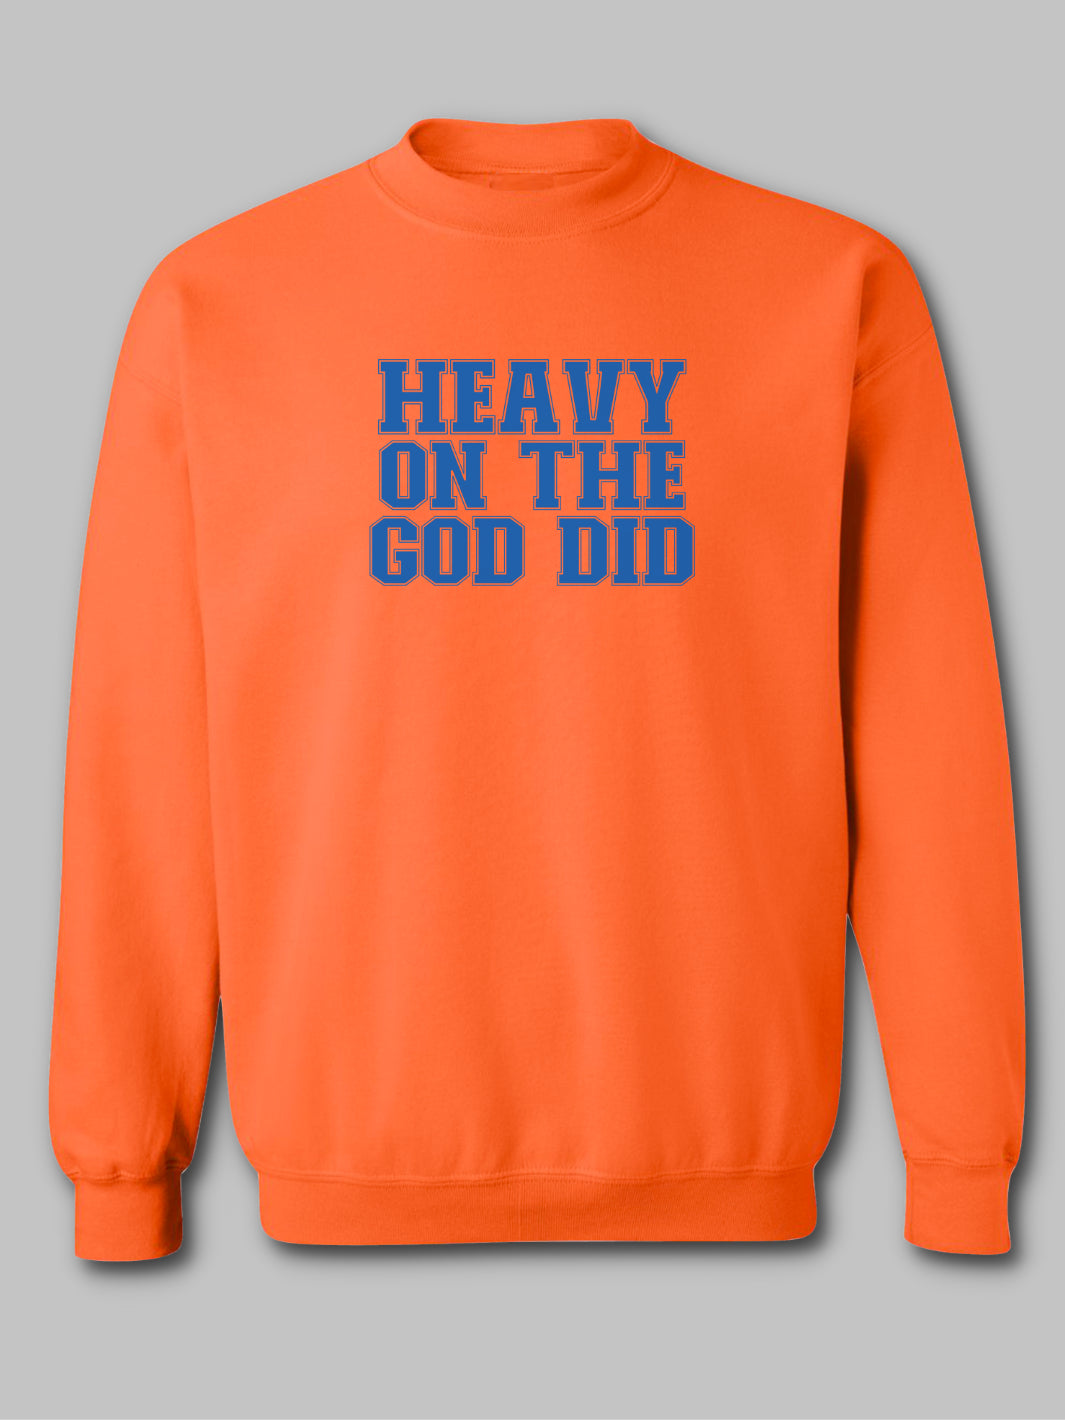 Image of a christian based vibrant orange crewneck sweatshirt with the phrase 'Heavy on the God Did' prominently displayed in bold, contrasting lettering. The text color, royal blue, stands out against the bright orange background, emphasizing the message of strong faith and divine intervention. The design reflects a bold statement of spiritual confidence and gratitude. Faith based. 